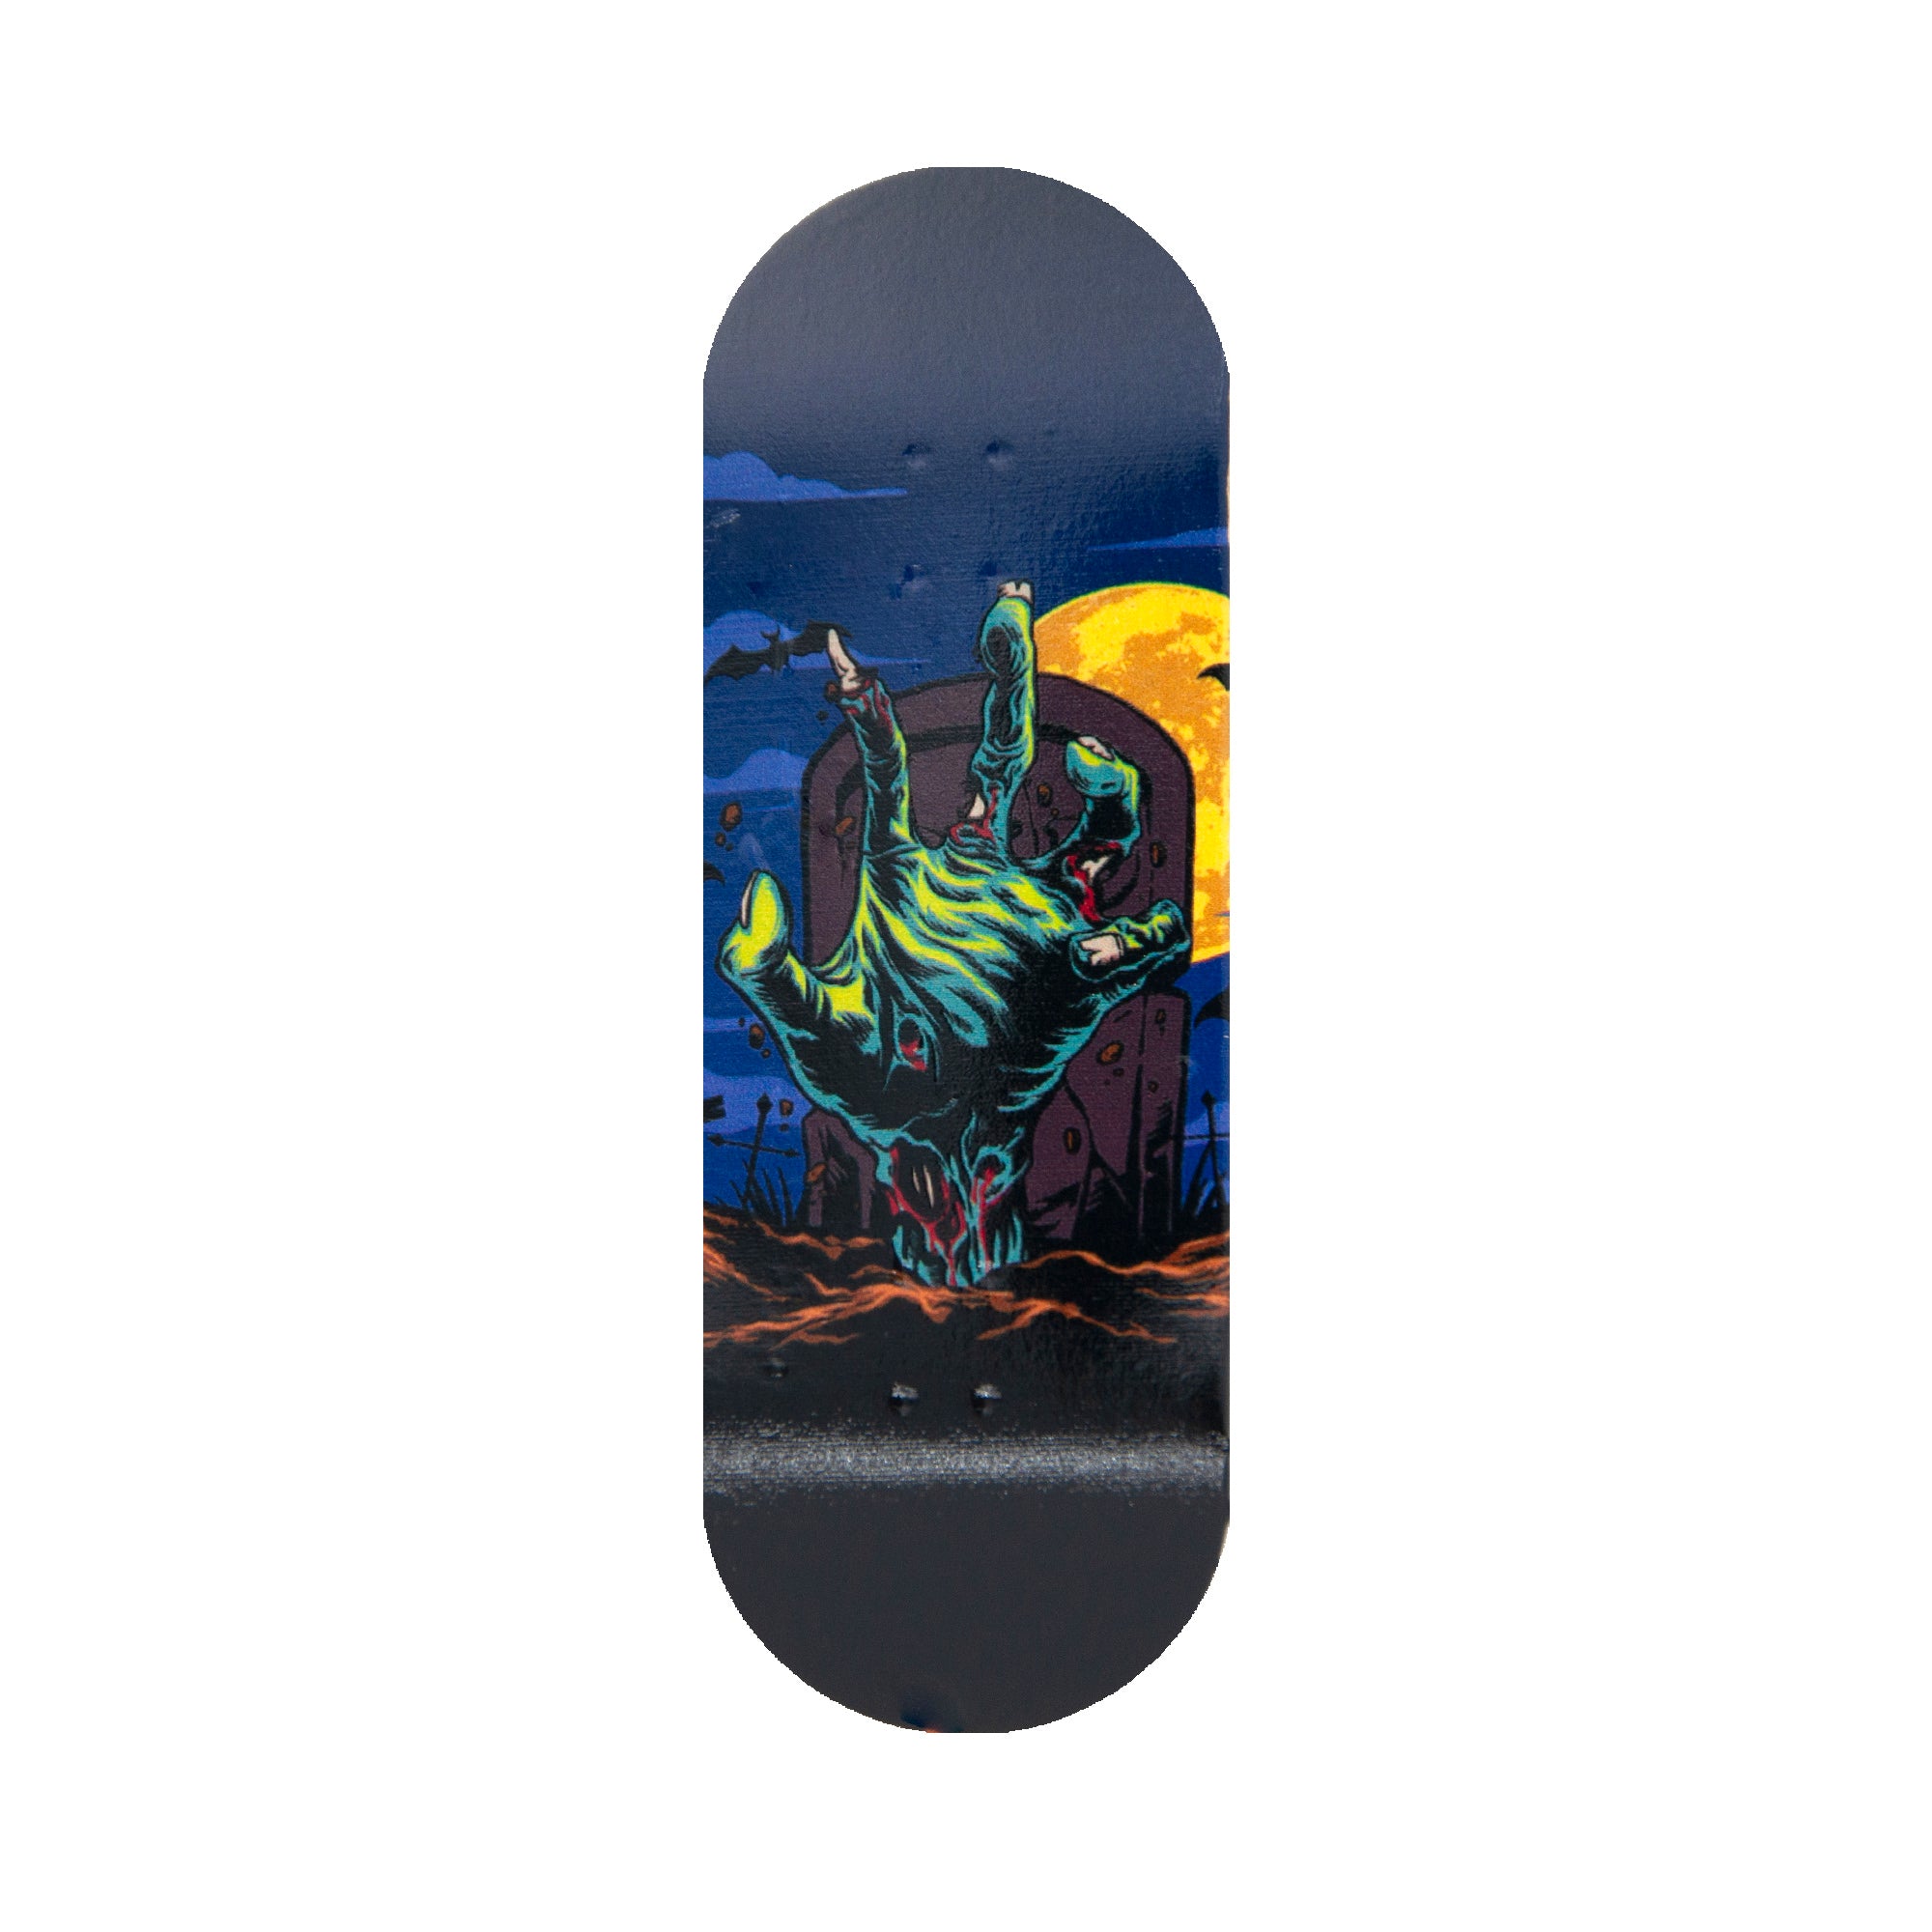 Real Wear Graphic Professional Fingerboard Deck - Zombie Hand